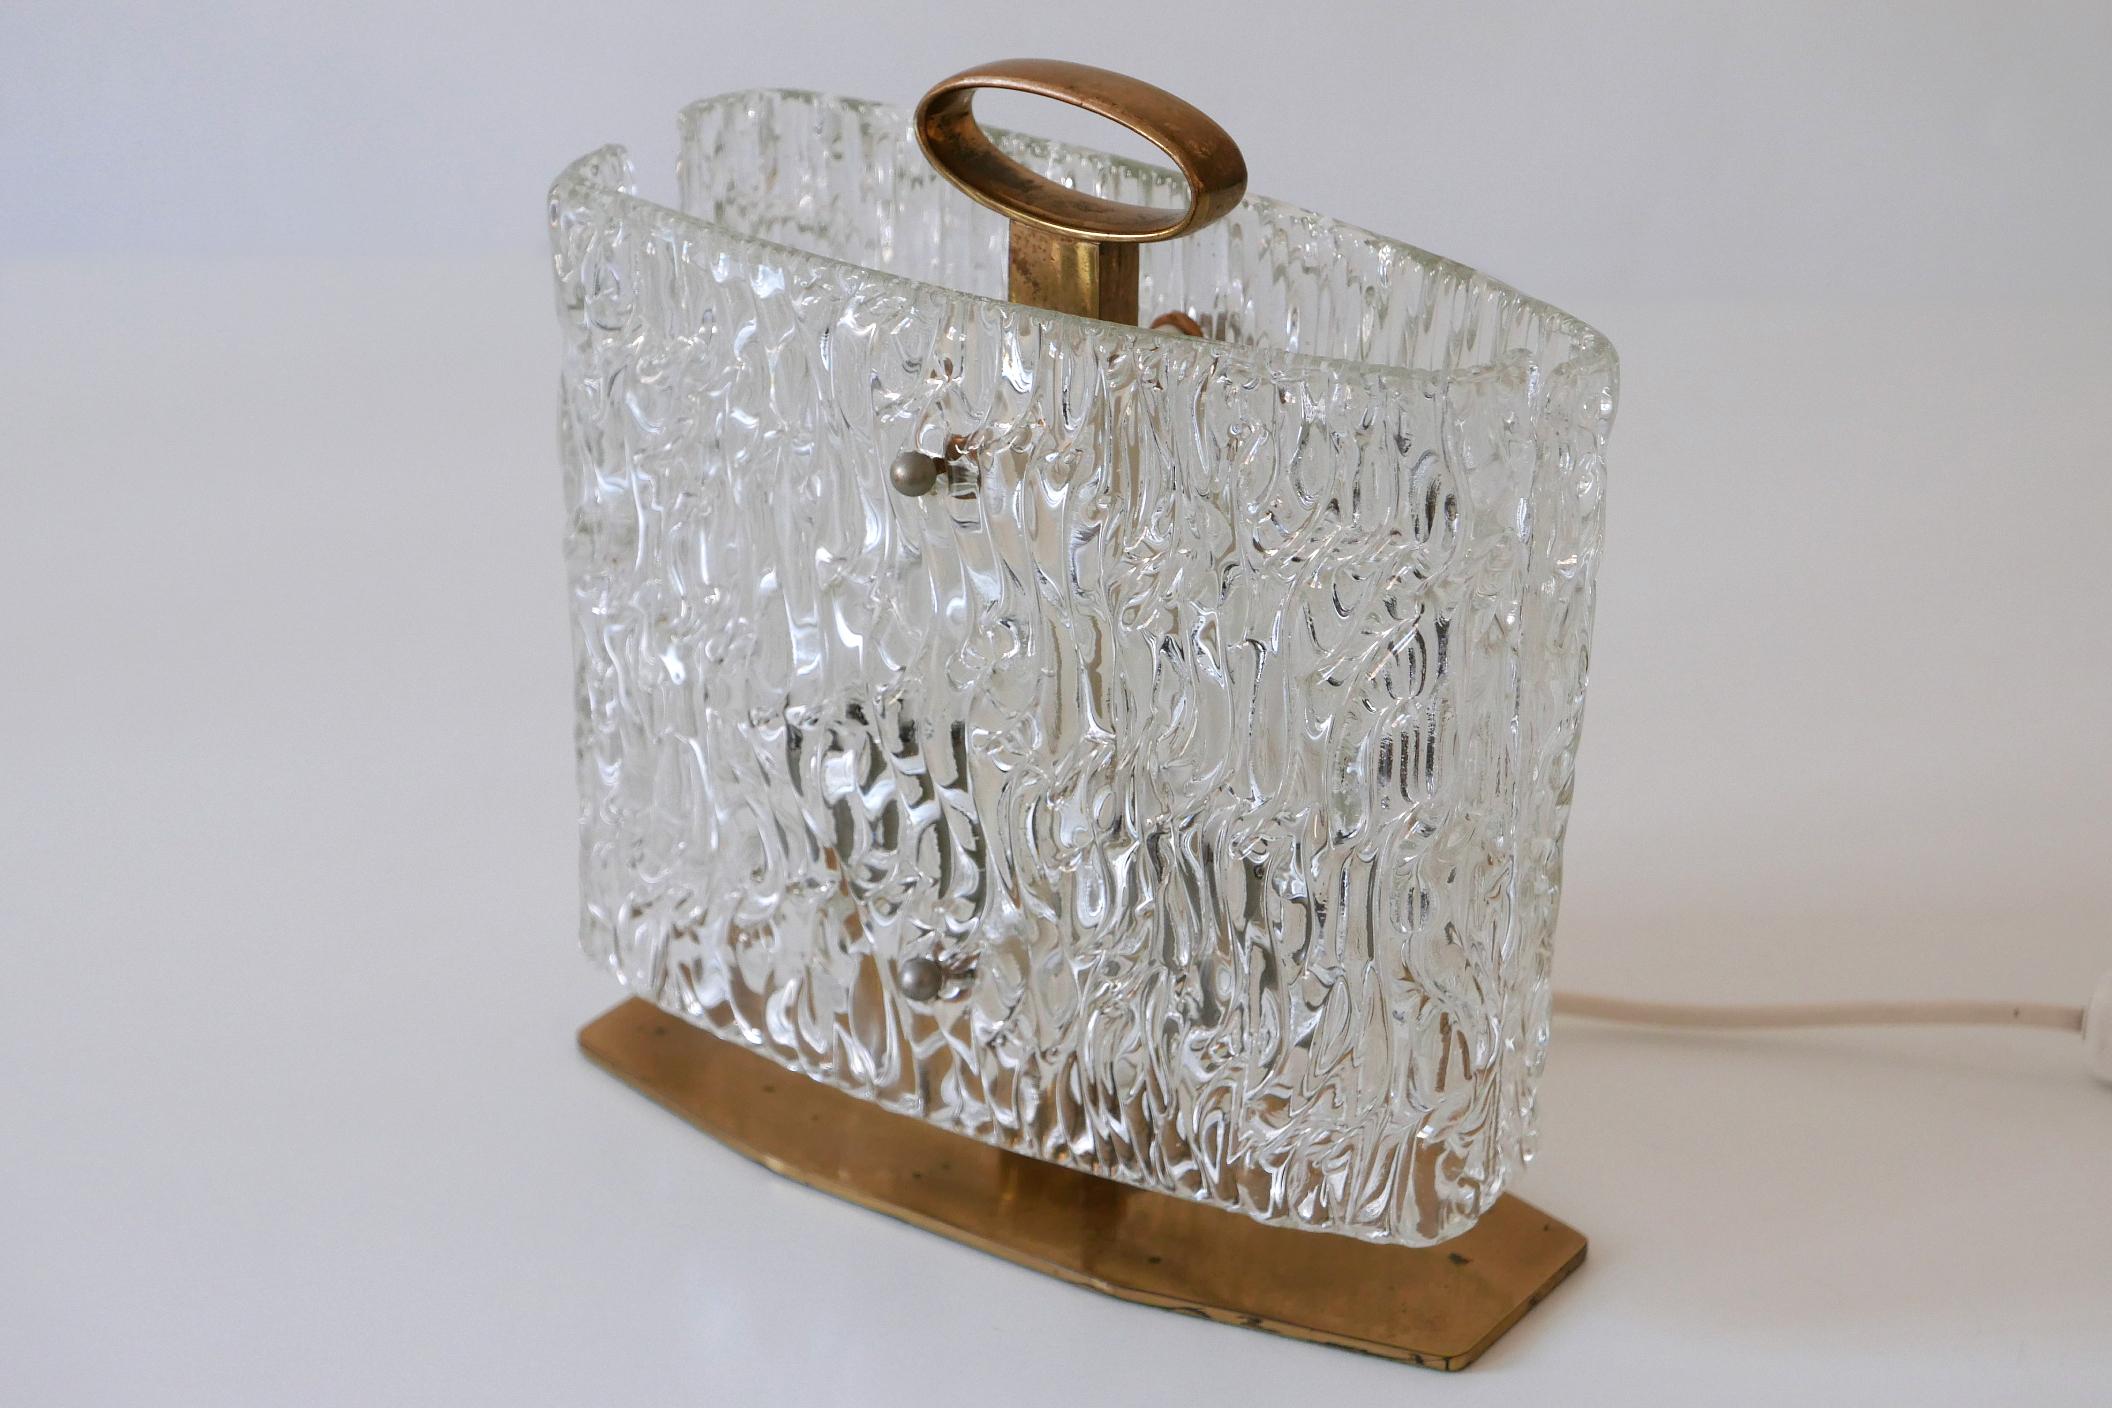 Exceptional Mid-Century Modern Table Lamp with Ice Glass Shade, 1950s, Italy In Good Condition For Sale In Munich, DE